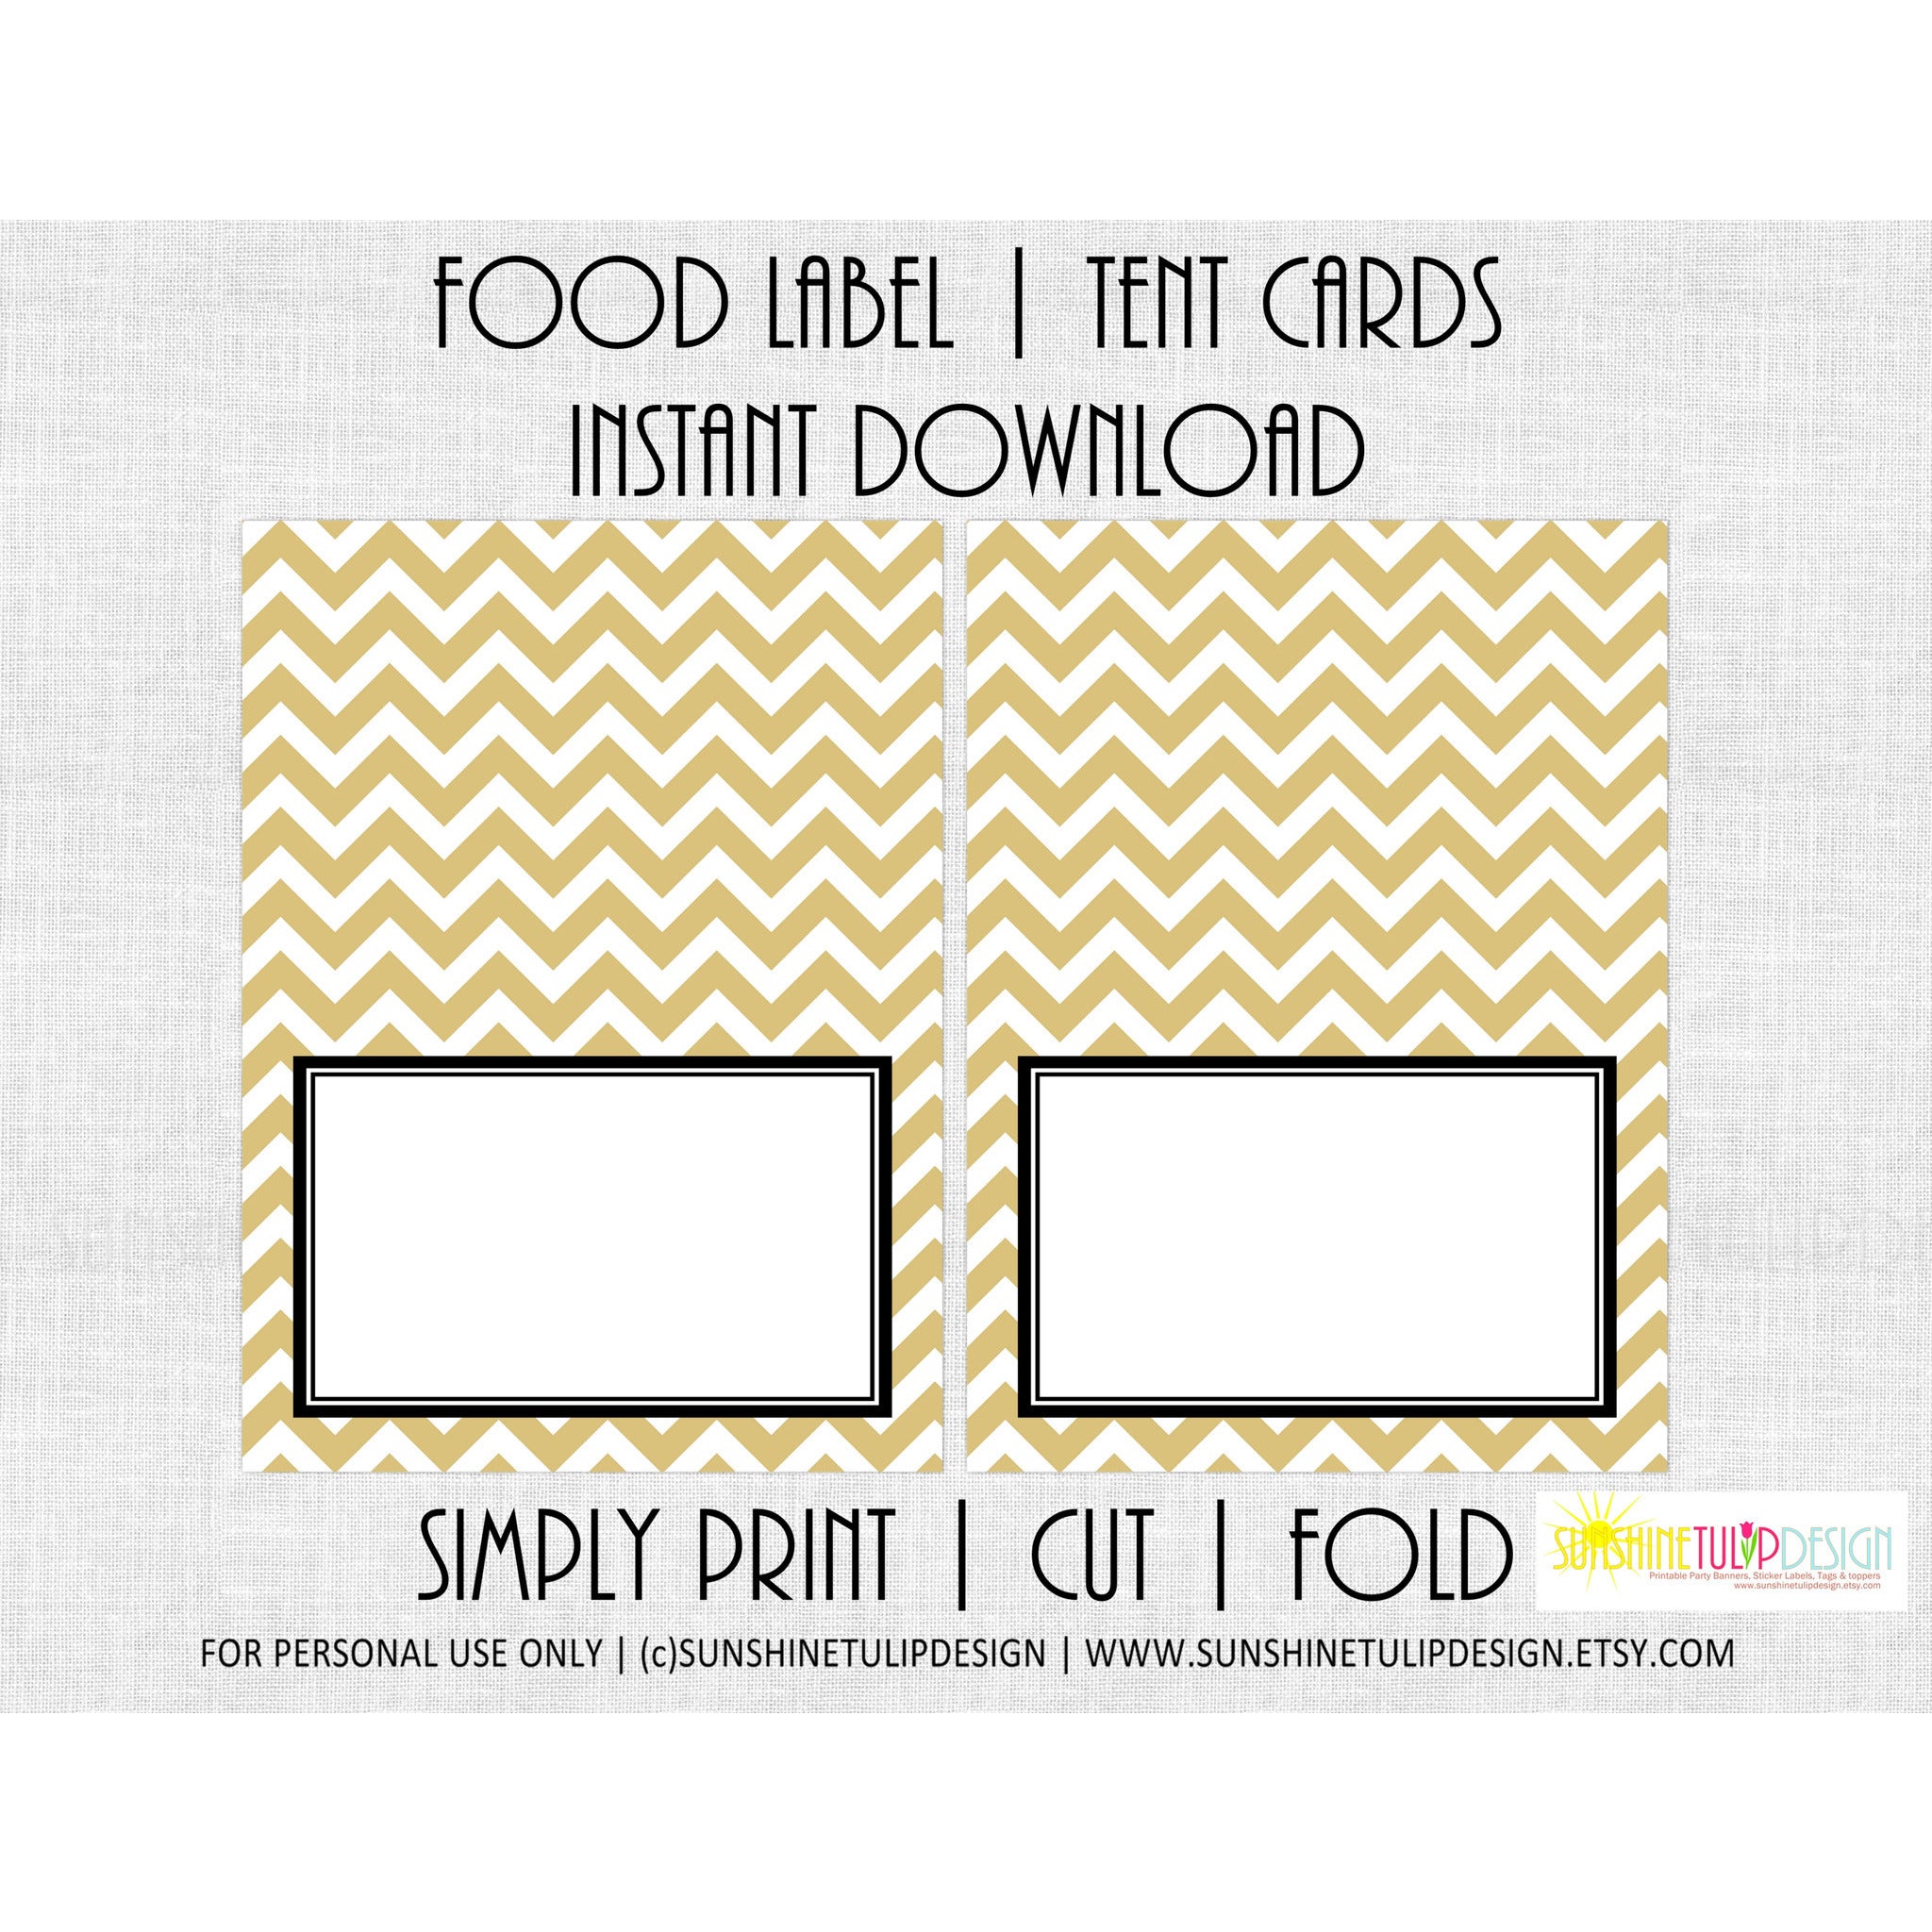 Free Printable Food Tent Cards Templates